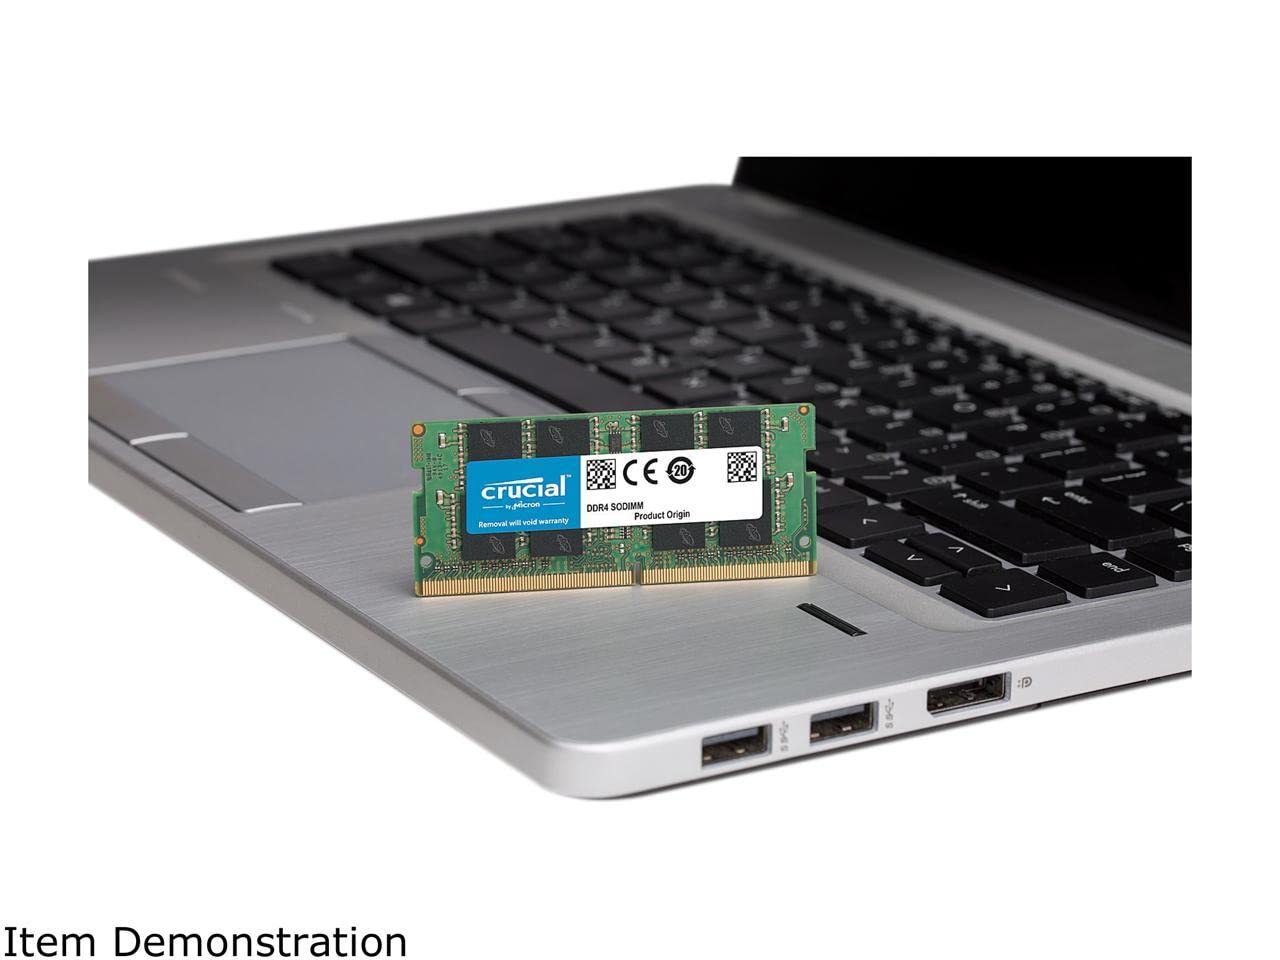 Crucial RAM 32GB Kit (2x16GB) DDR4 3200MHz CL22 (or 2933MHz or 2666MHz) Laptop Memory CT2K16G4SFRA32A